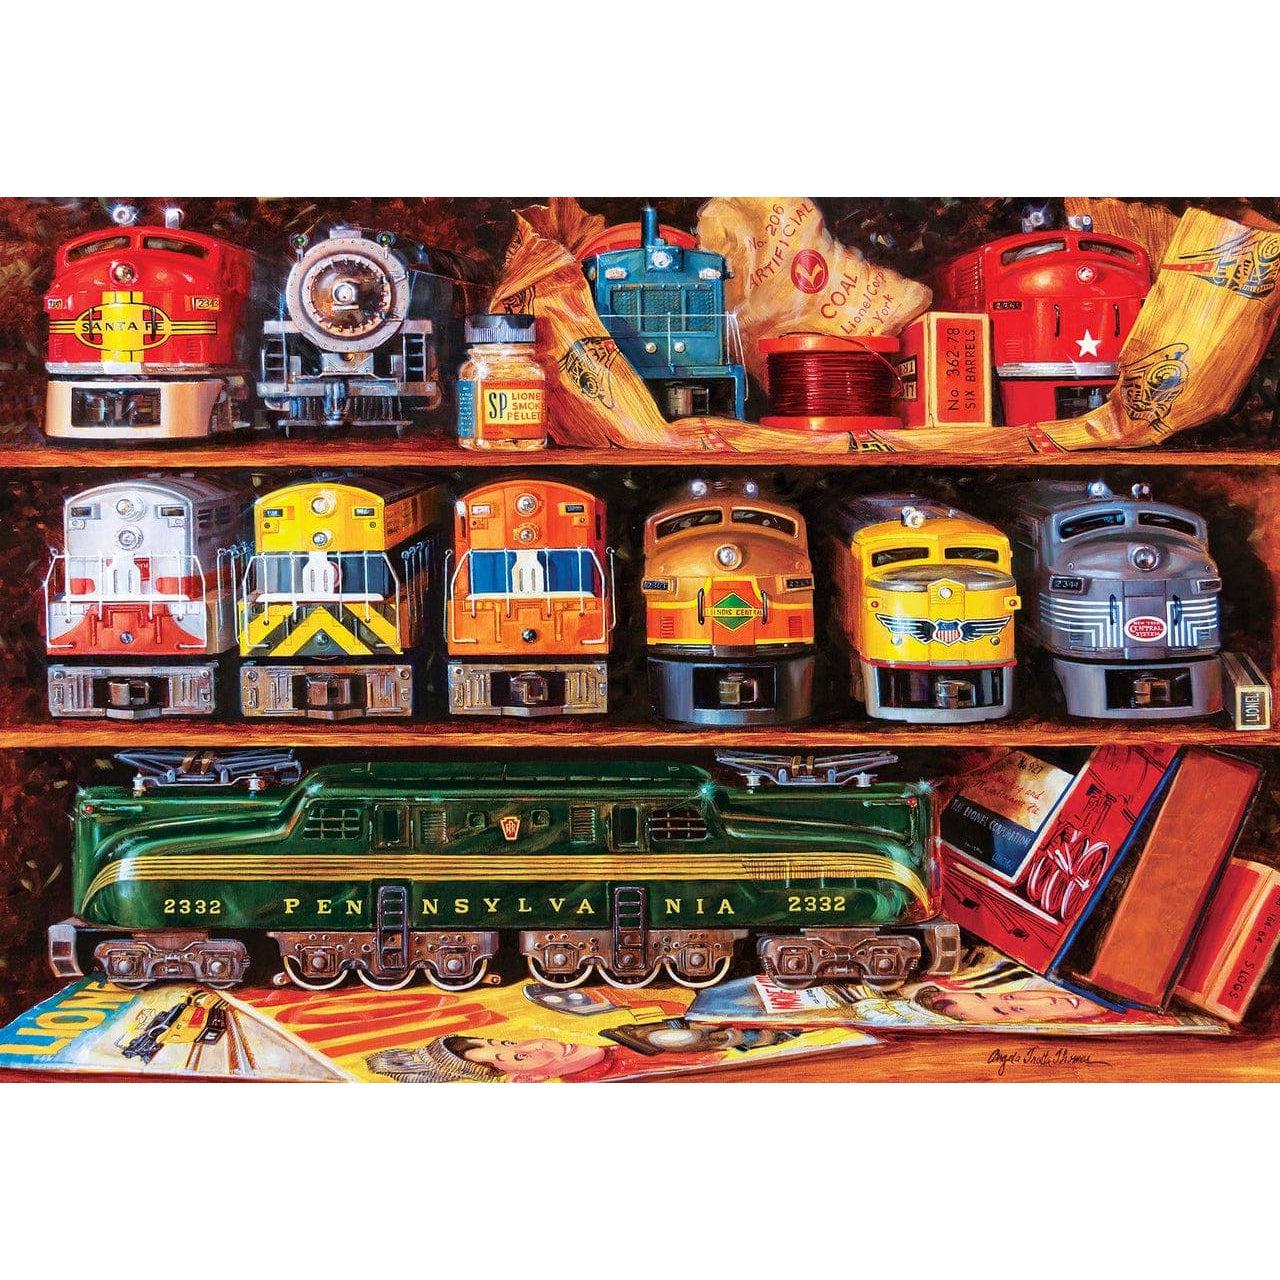 MasterPieces-Signature Series Lionel - Well Stocked Shelves - 2000 Piece Puzzle-72046-Legacy Toys